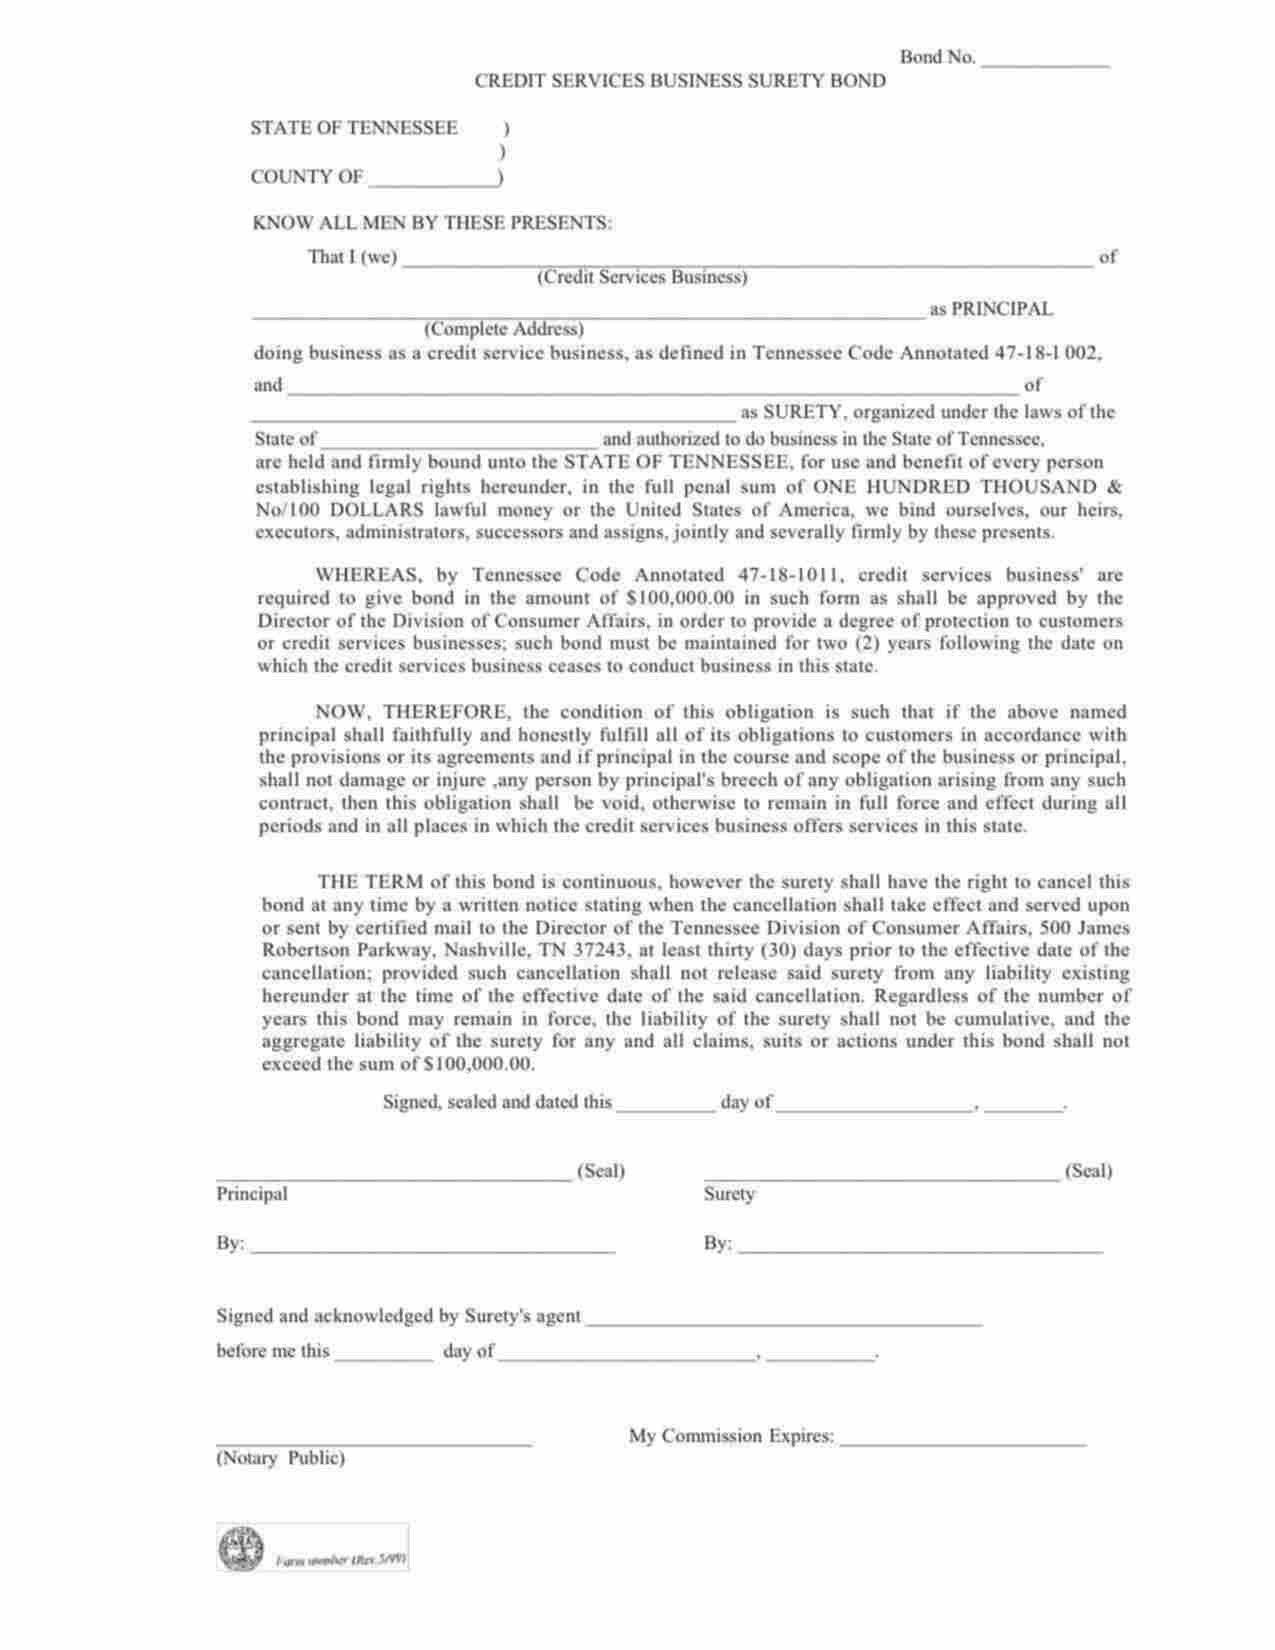 Tennessee Credit Services Business Bond Form